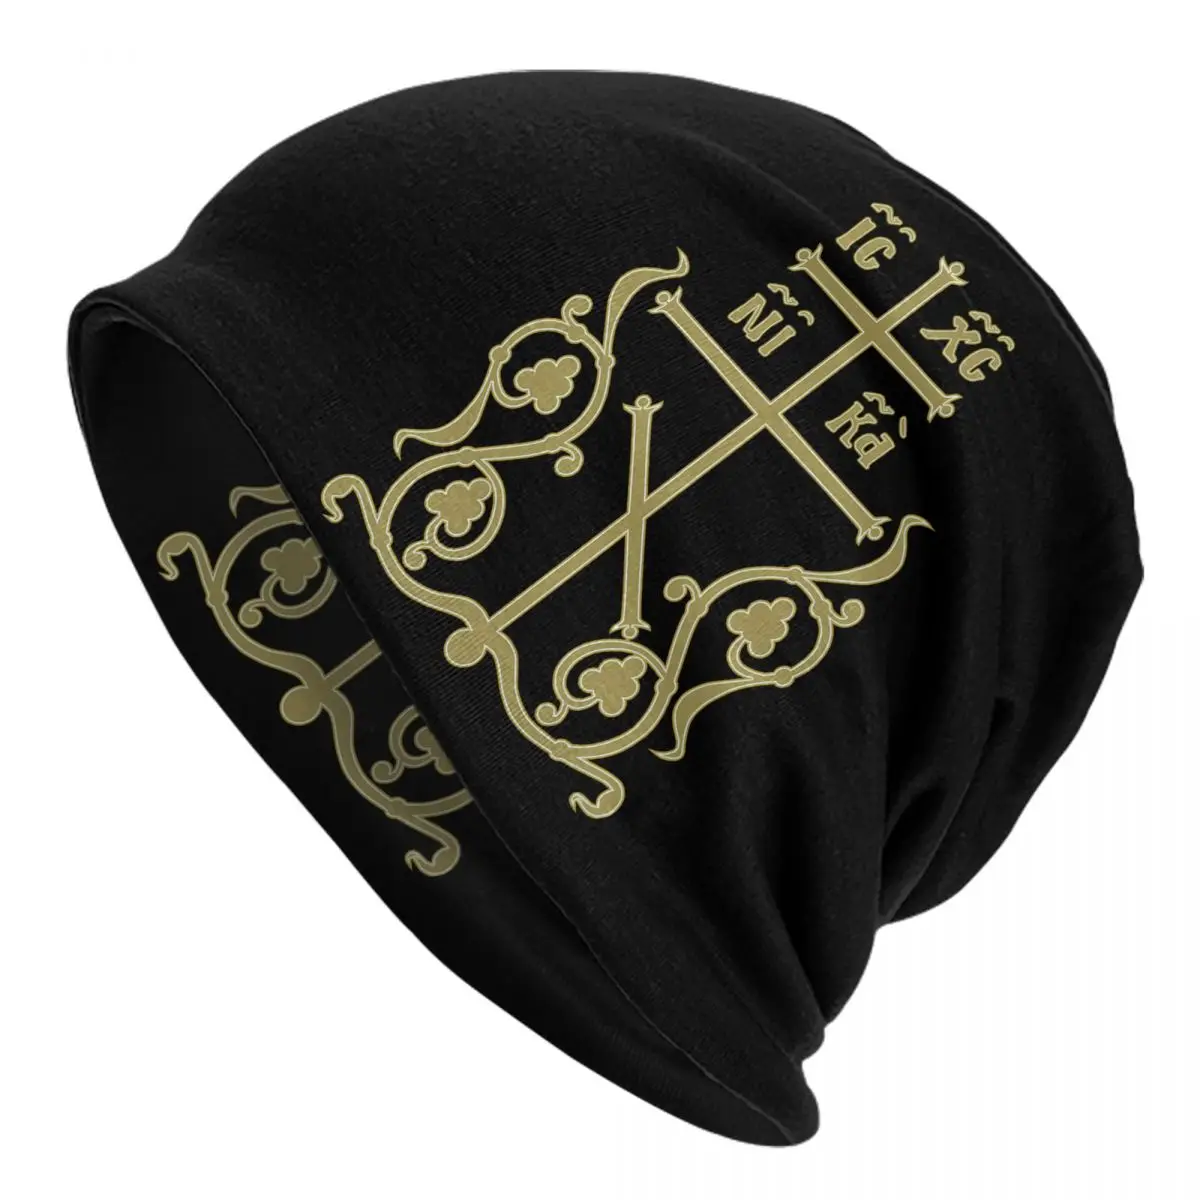 Patriarchal Cross Orthodox Adult Men's Women's Knit Hat Keep warm winter Funny knitted hat